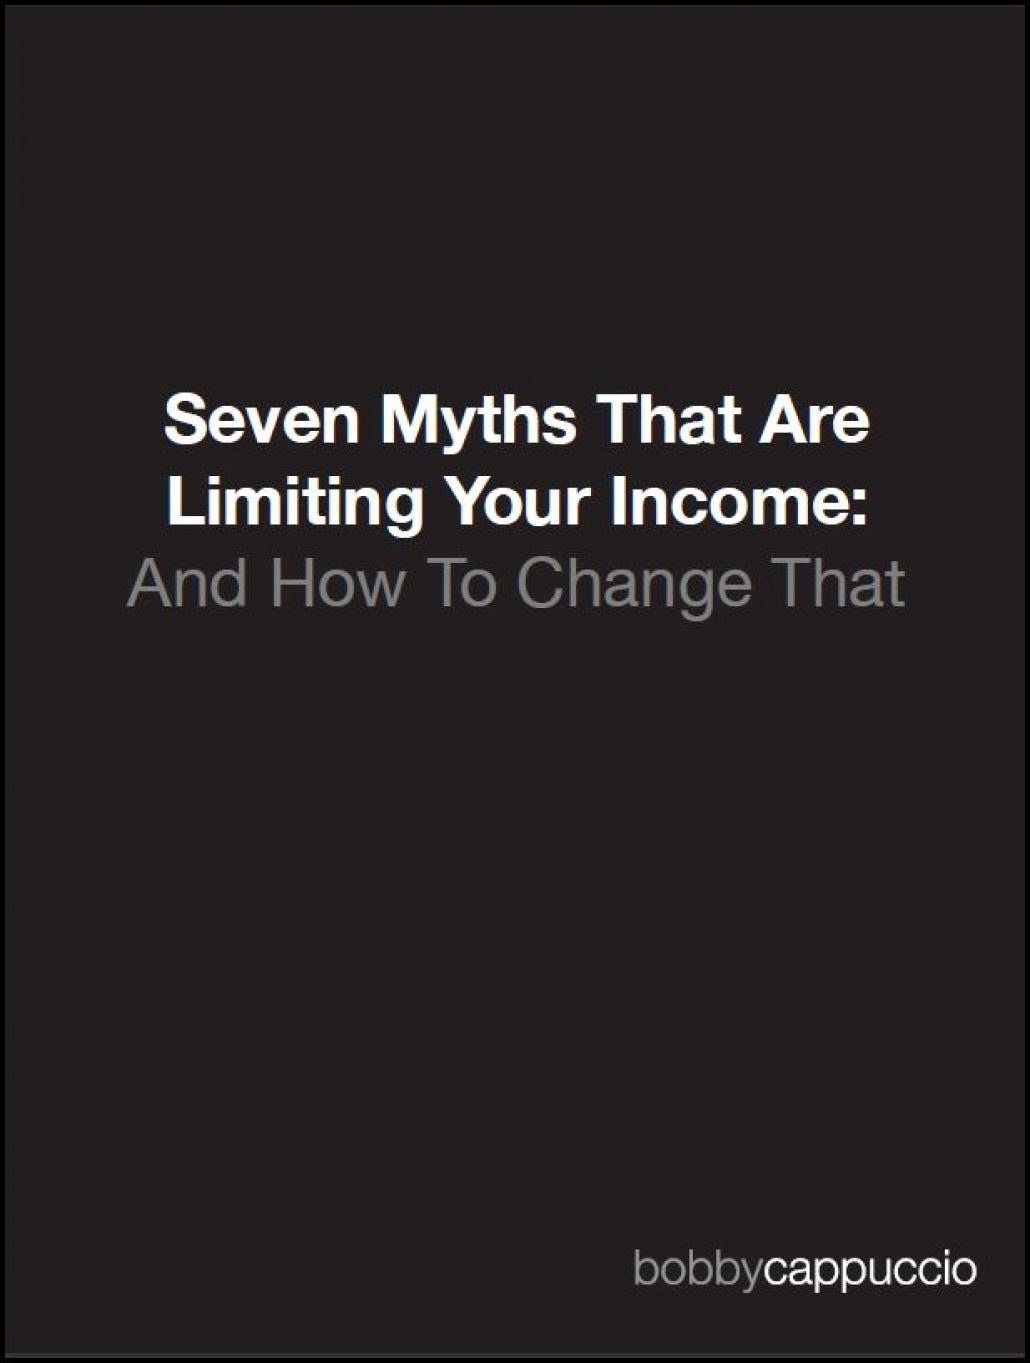 Seven Myths That Are Limiting Your Income: And How To Change That